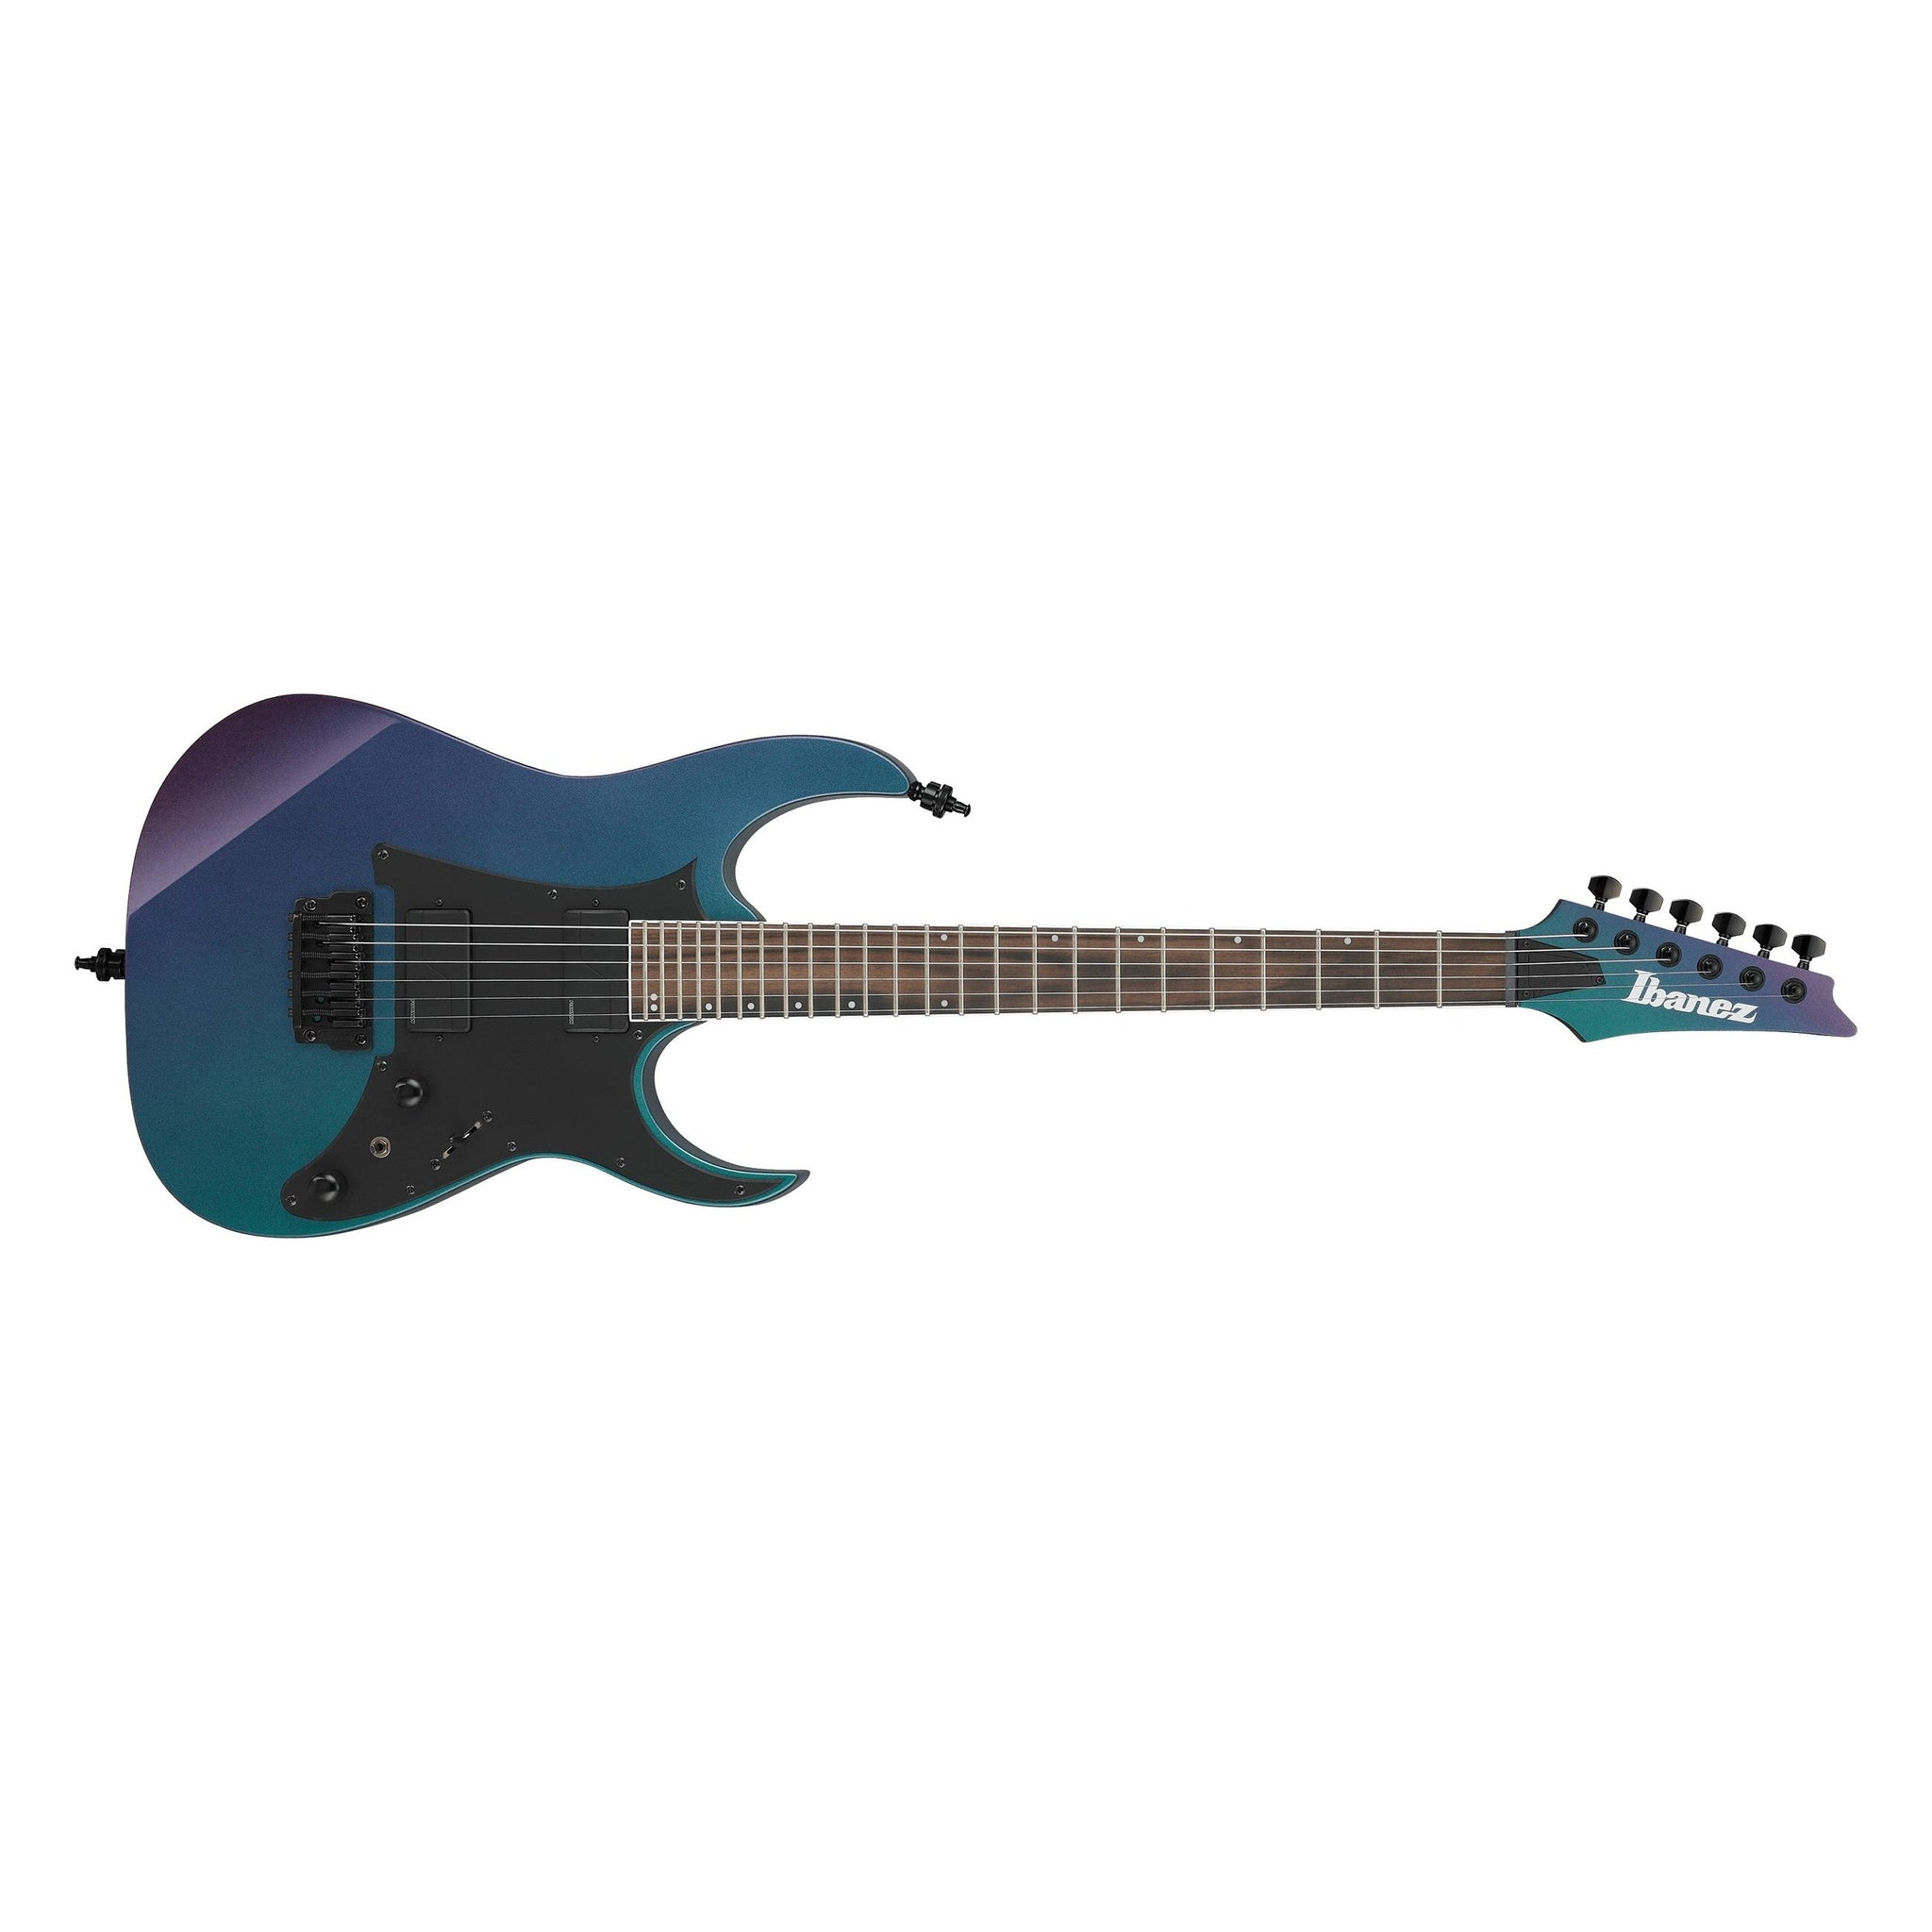 Ibanez RG631ALFBCM RG Axion Label Electric Guitar-Blue Chameleon-Music World Academy